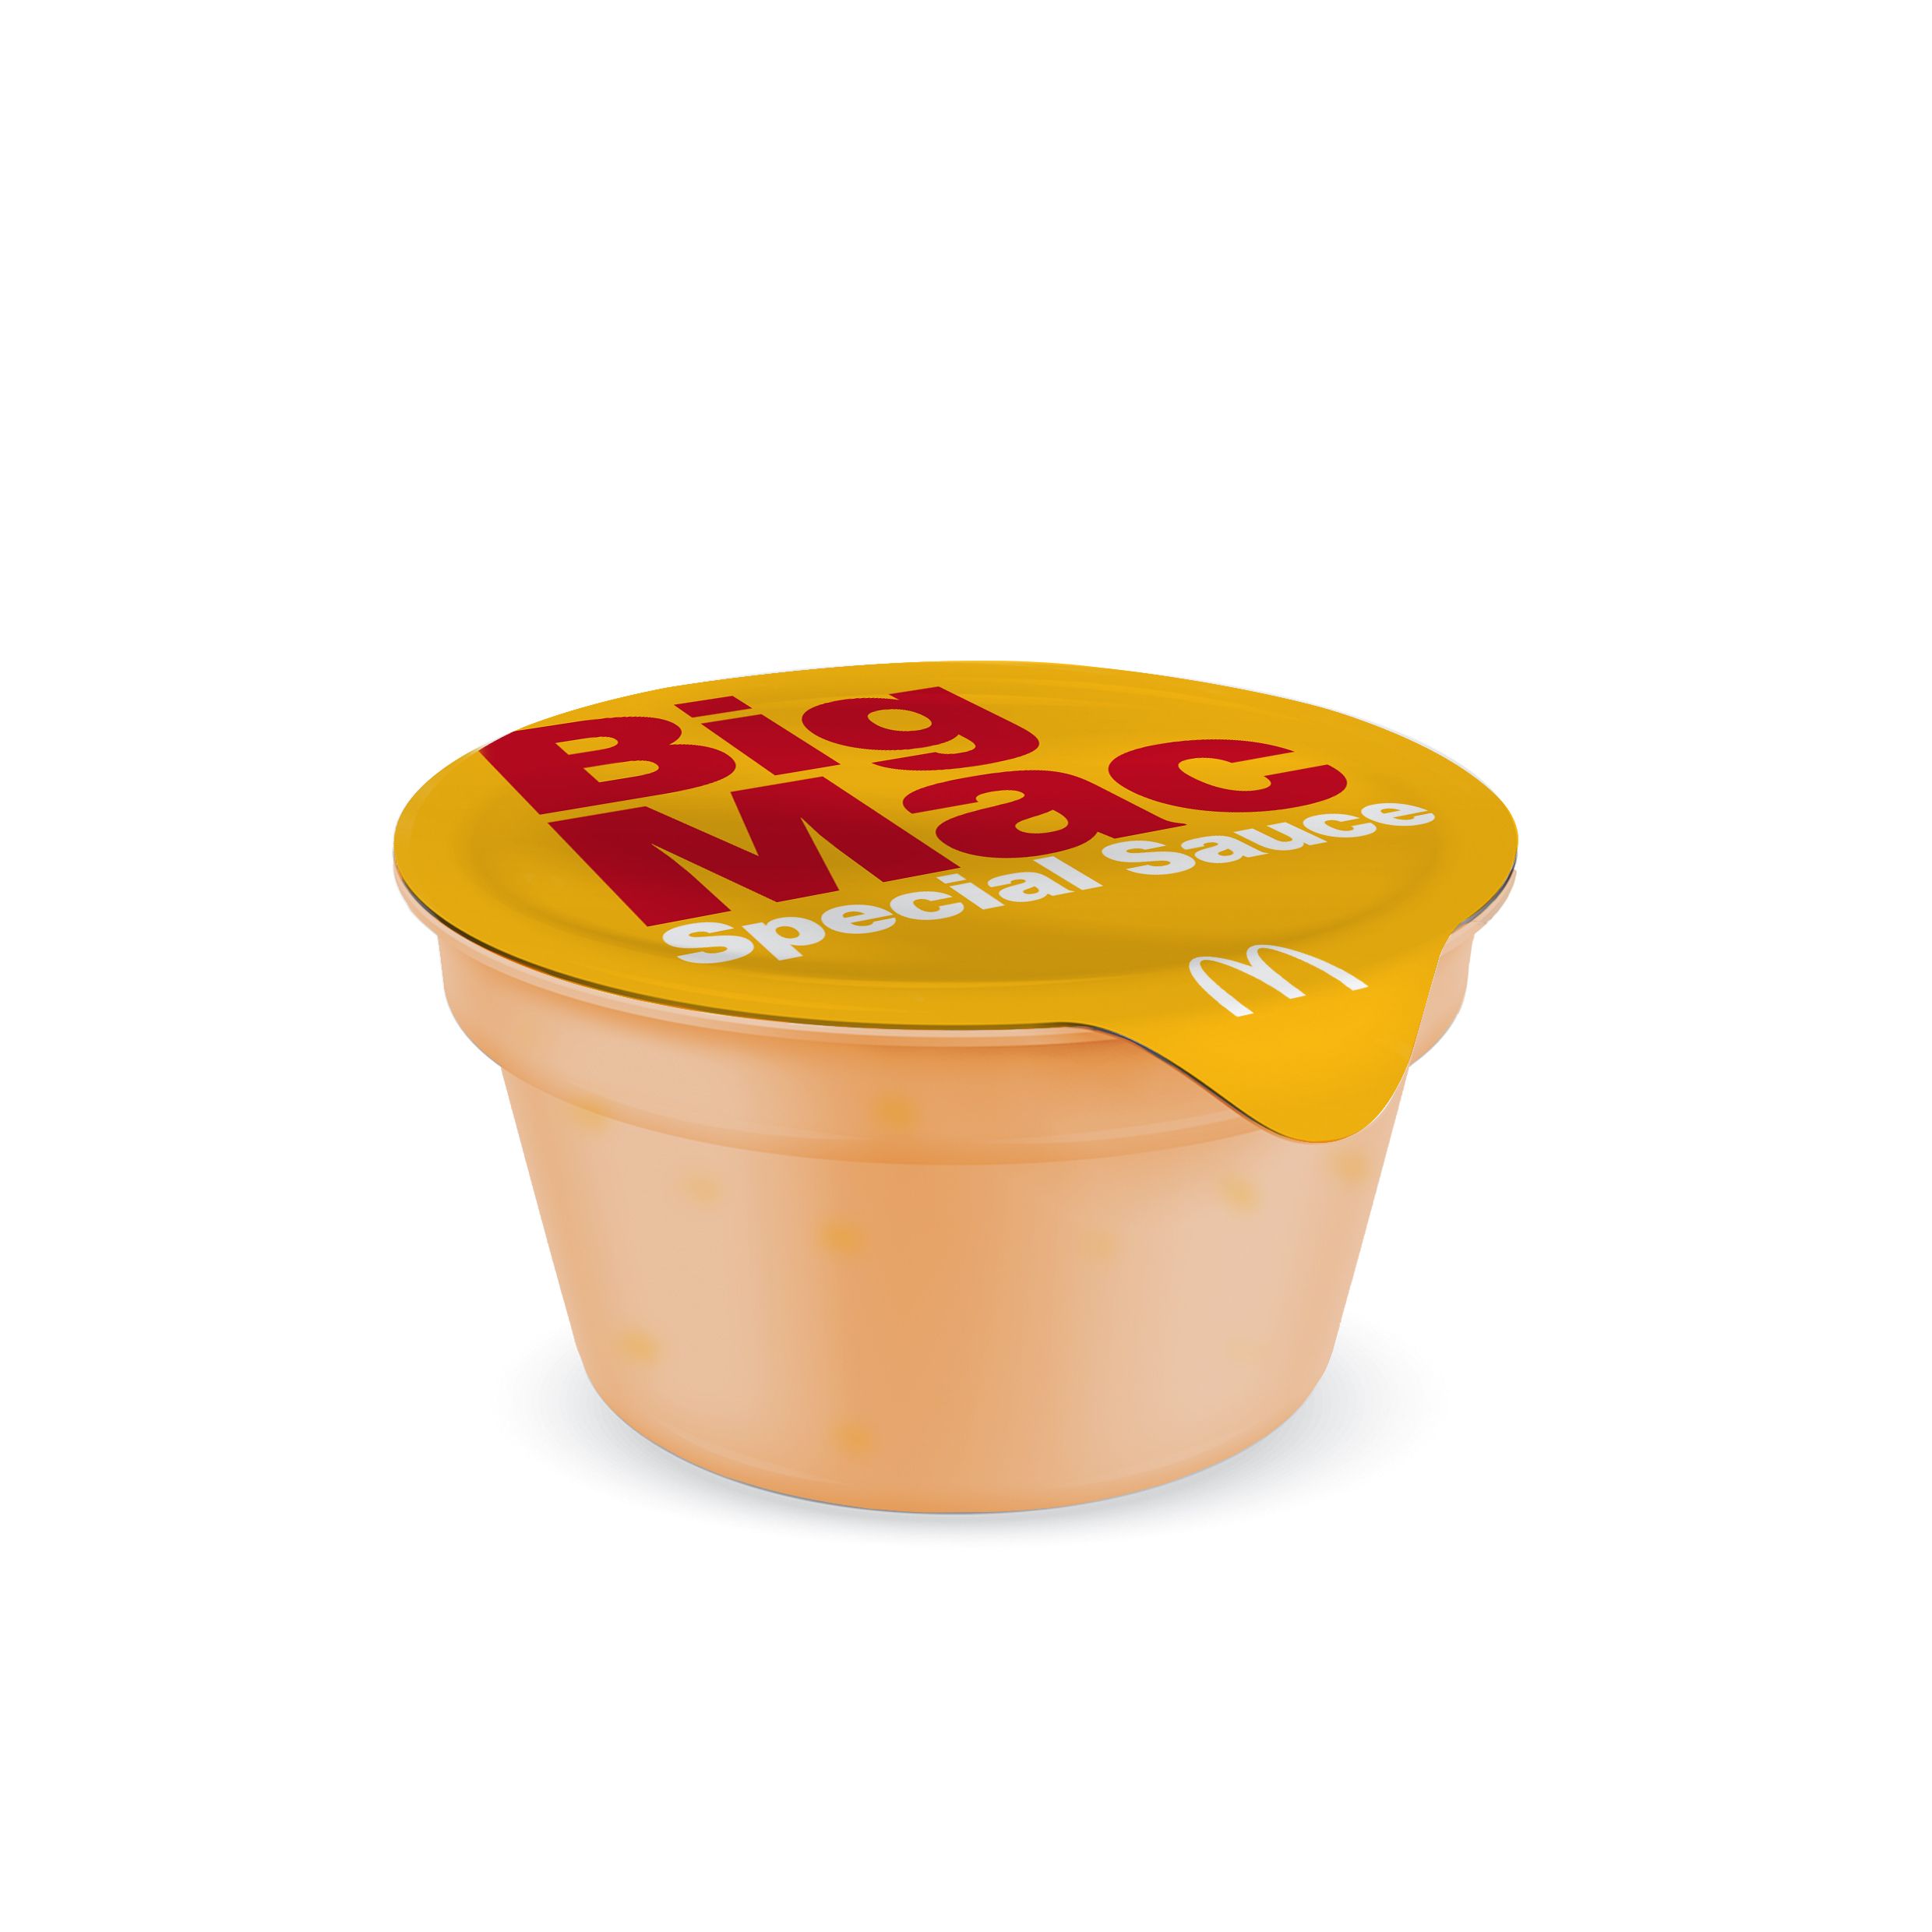 McDonald's Big Mac Sauce Pots To Dip Your Fries In Are On Sale Today!